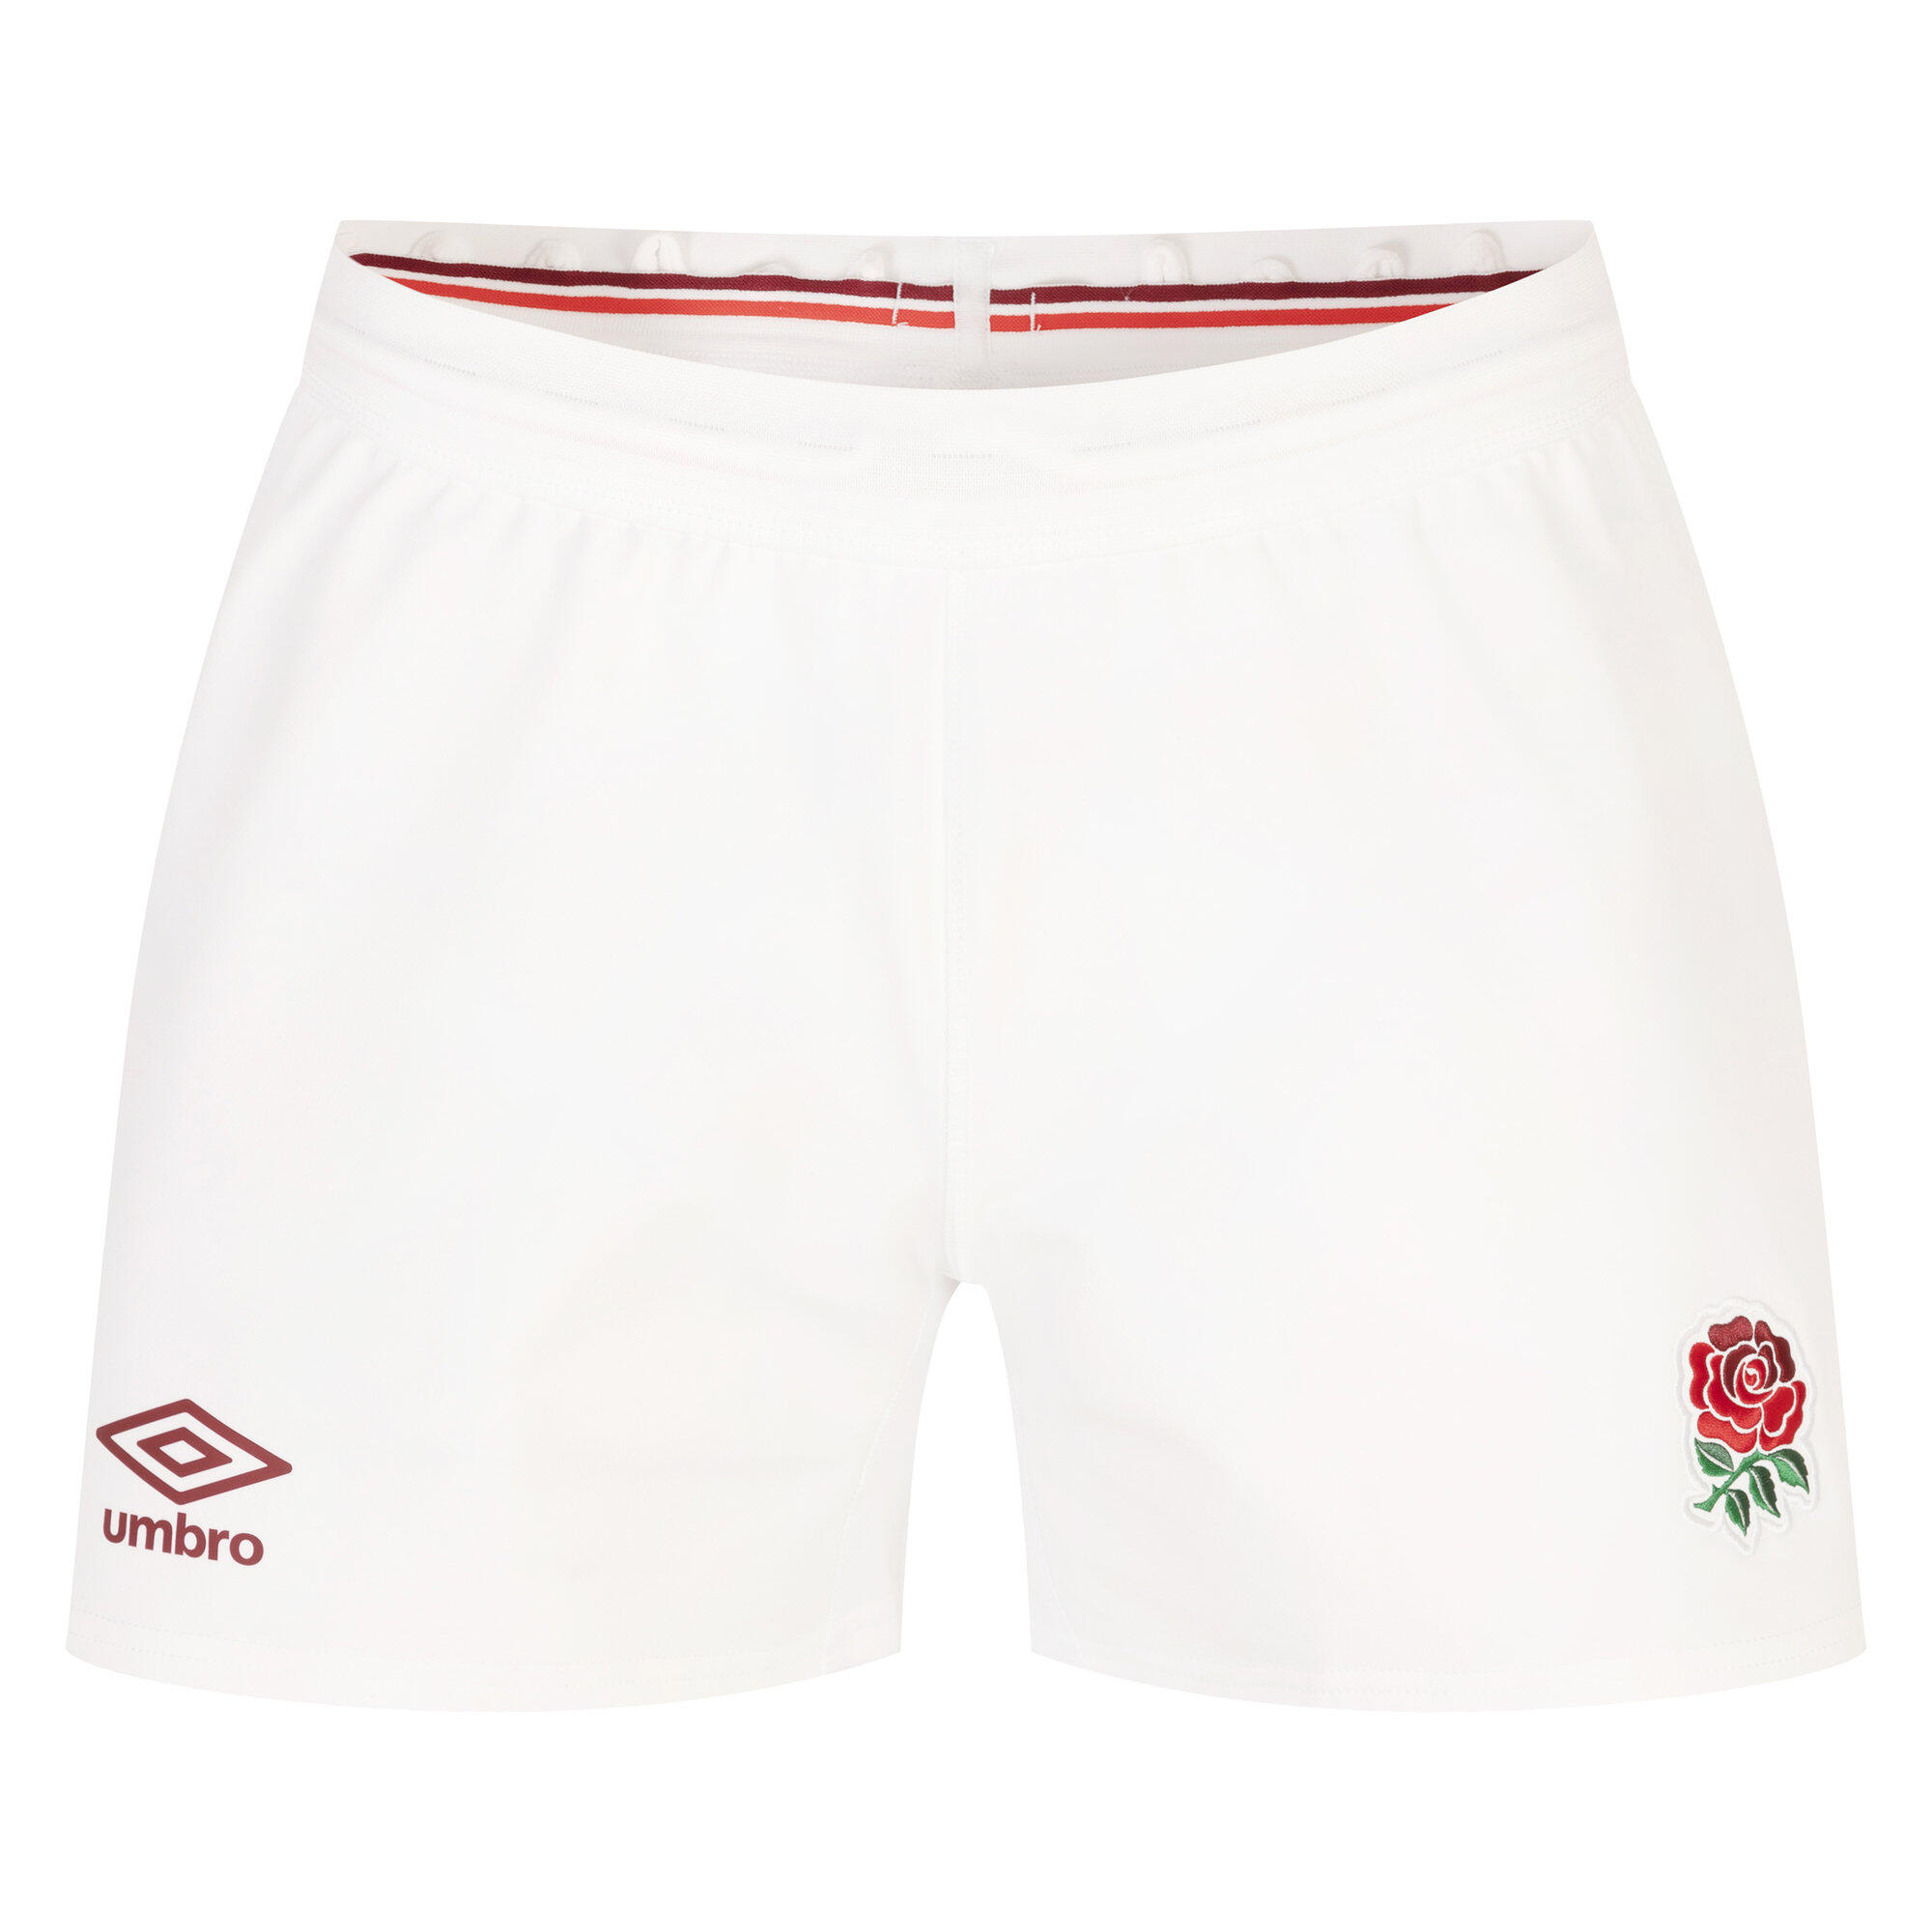 UMBRO Mens 23/24 Pro England Rugby Home Shorts (White)